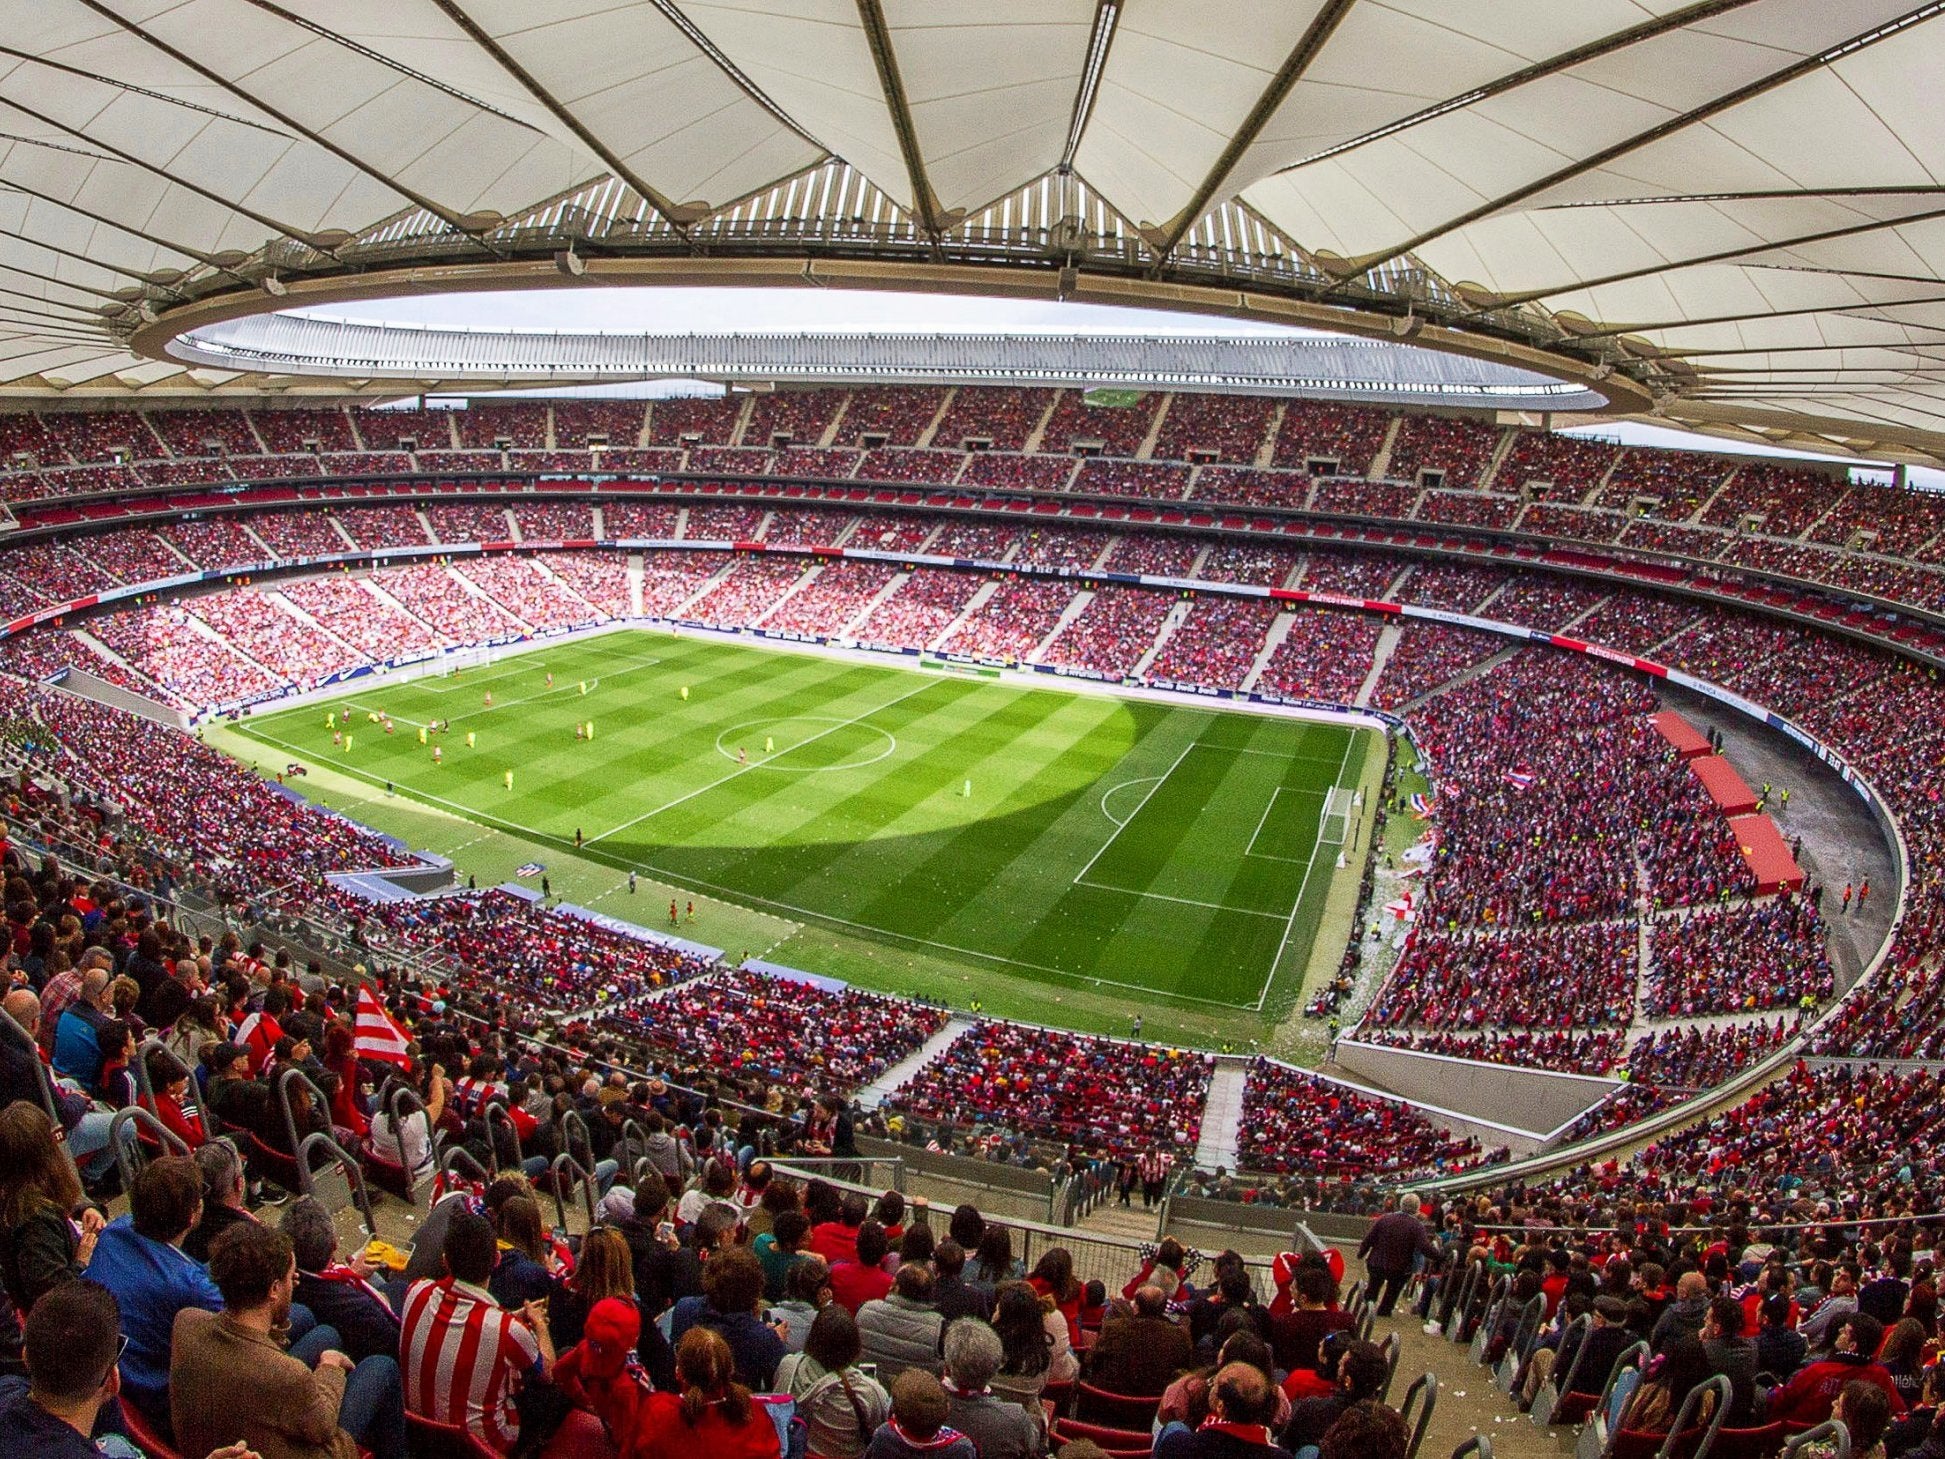 The home of Atletico Madrid will host the final